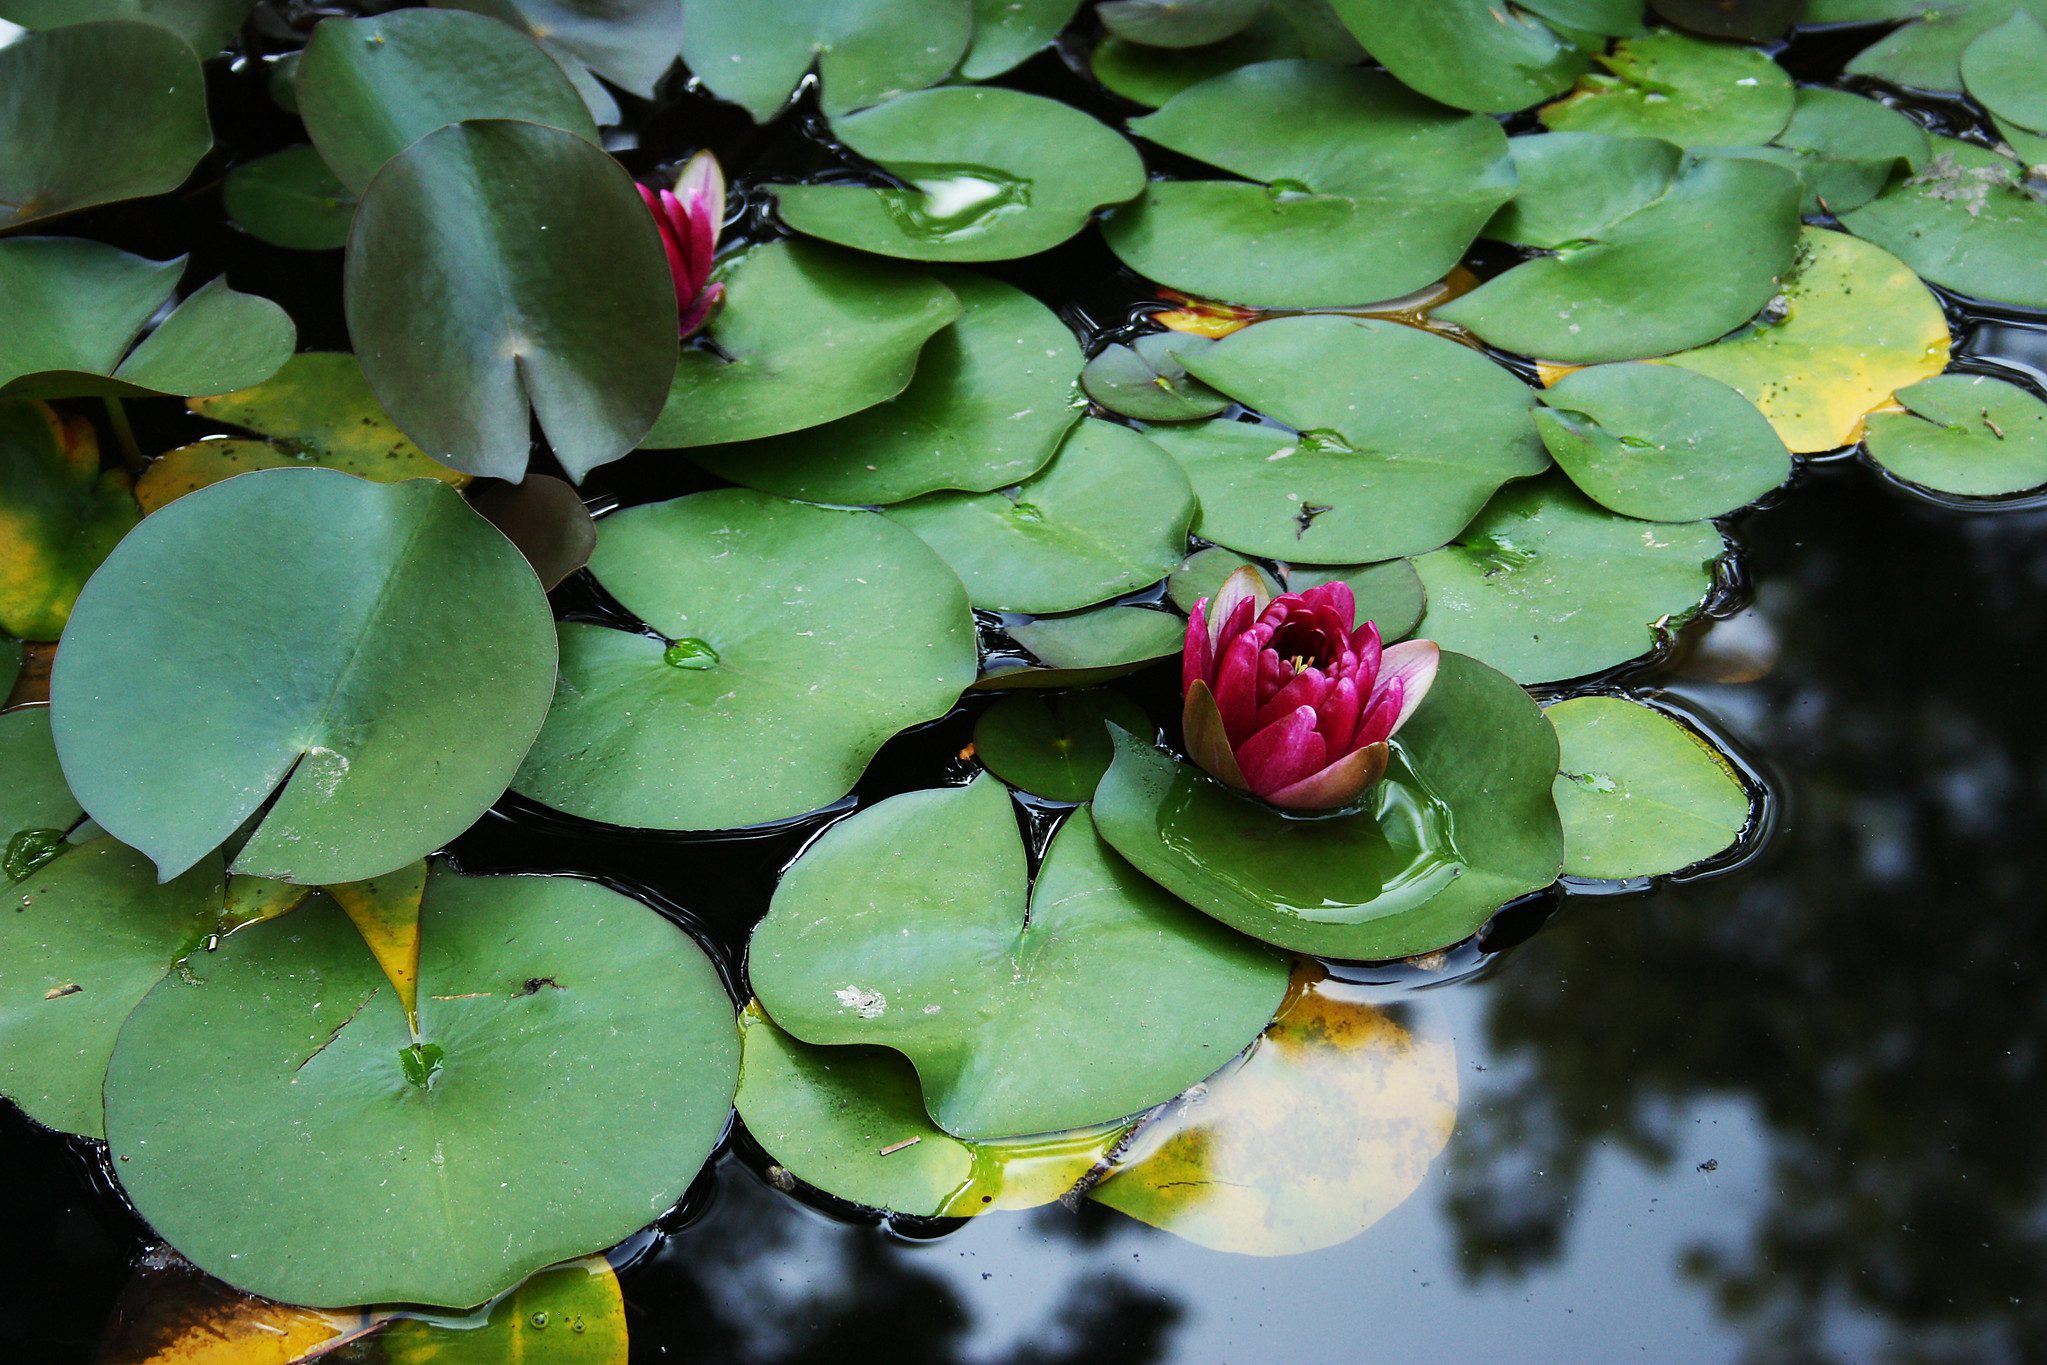 Lily pads on a pond